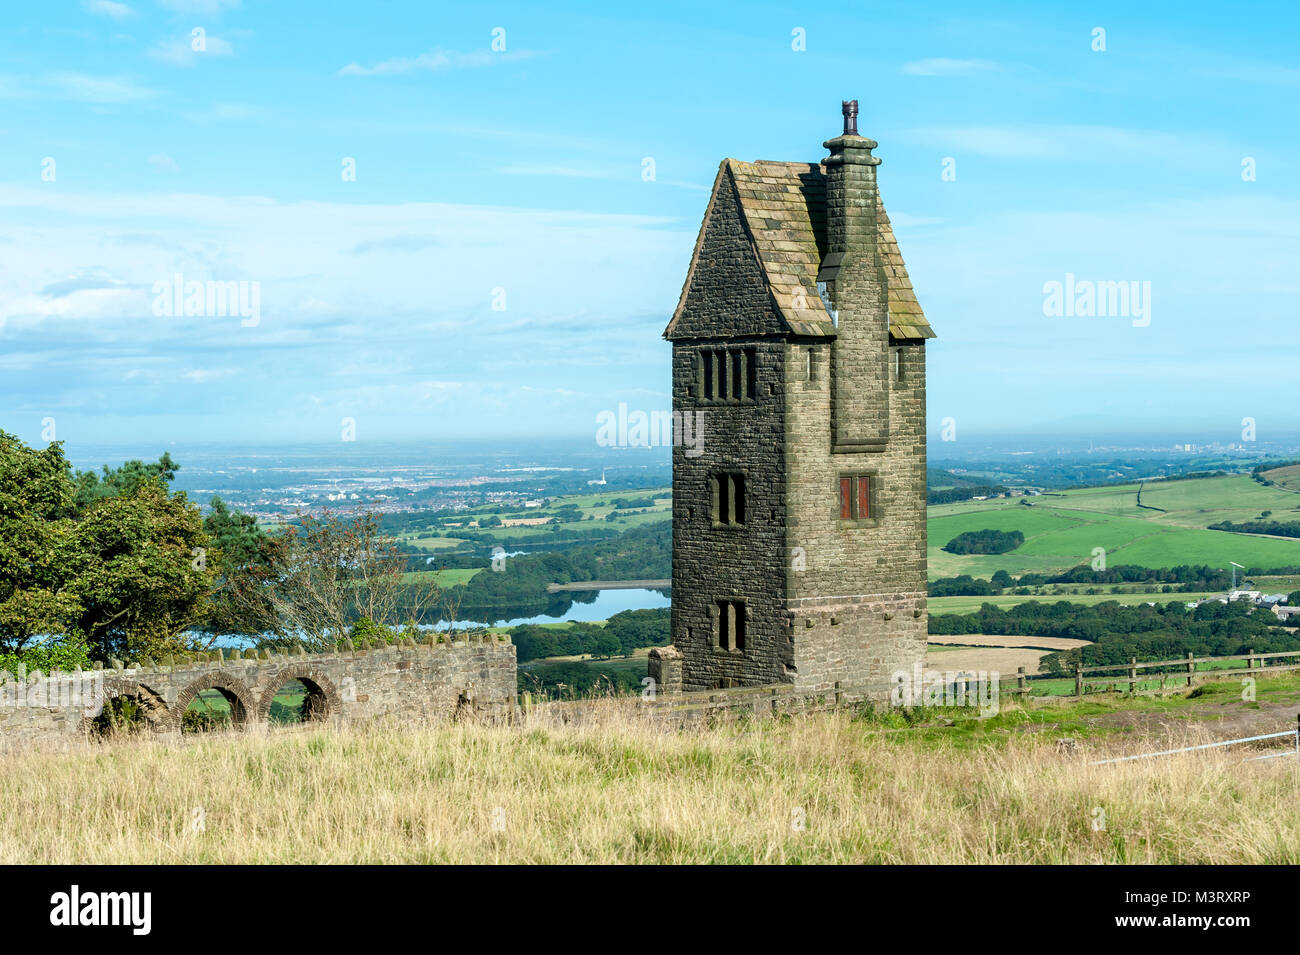 The Pigeon Tower Rivington It was built in 1910 by Lord Leverhulme as part of his Rivington estate in Lever Park and stands at the north west edge of  Stock Photo